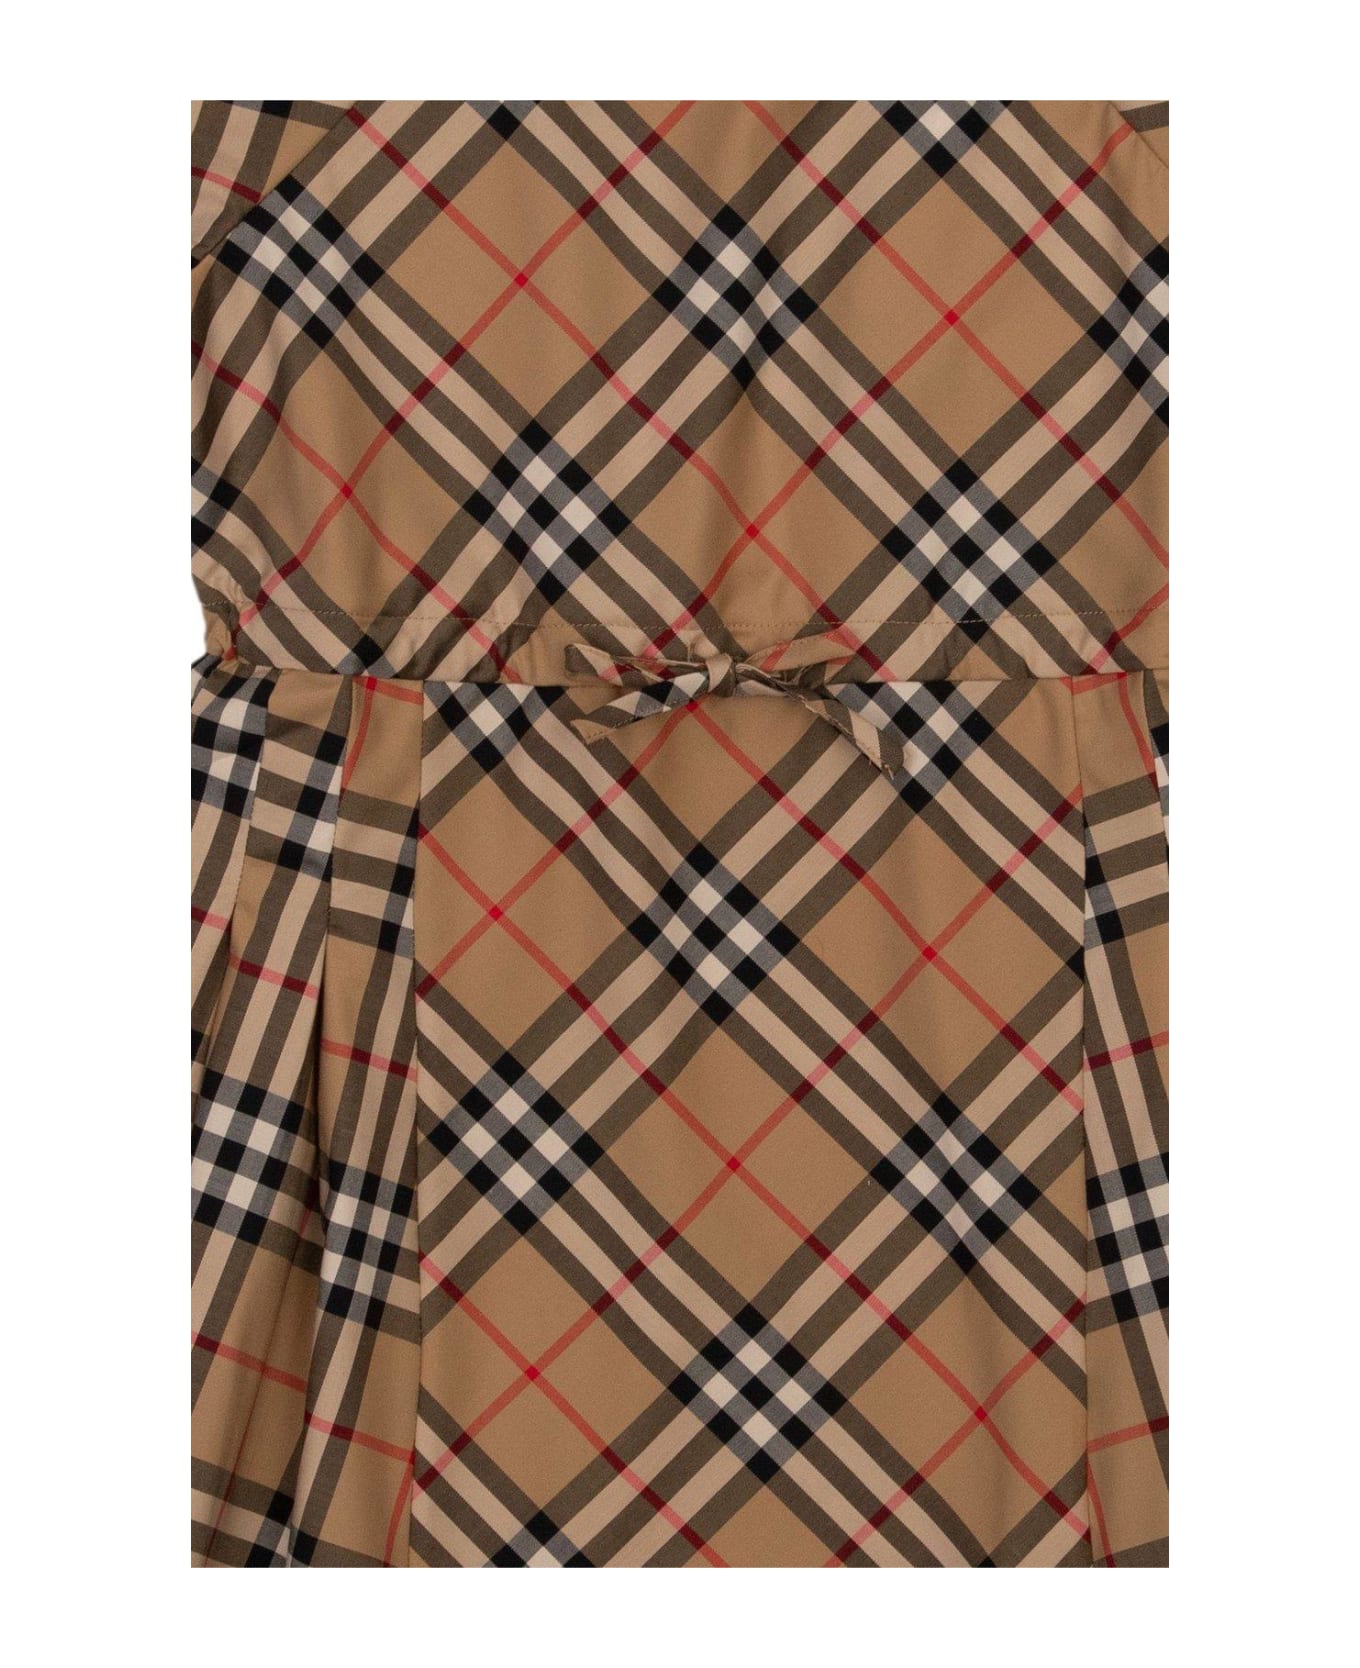 Burberry Checked Short-sleeved Dress - Archive Beige Ip Check ワンピース＆ドレス